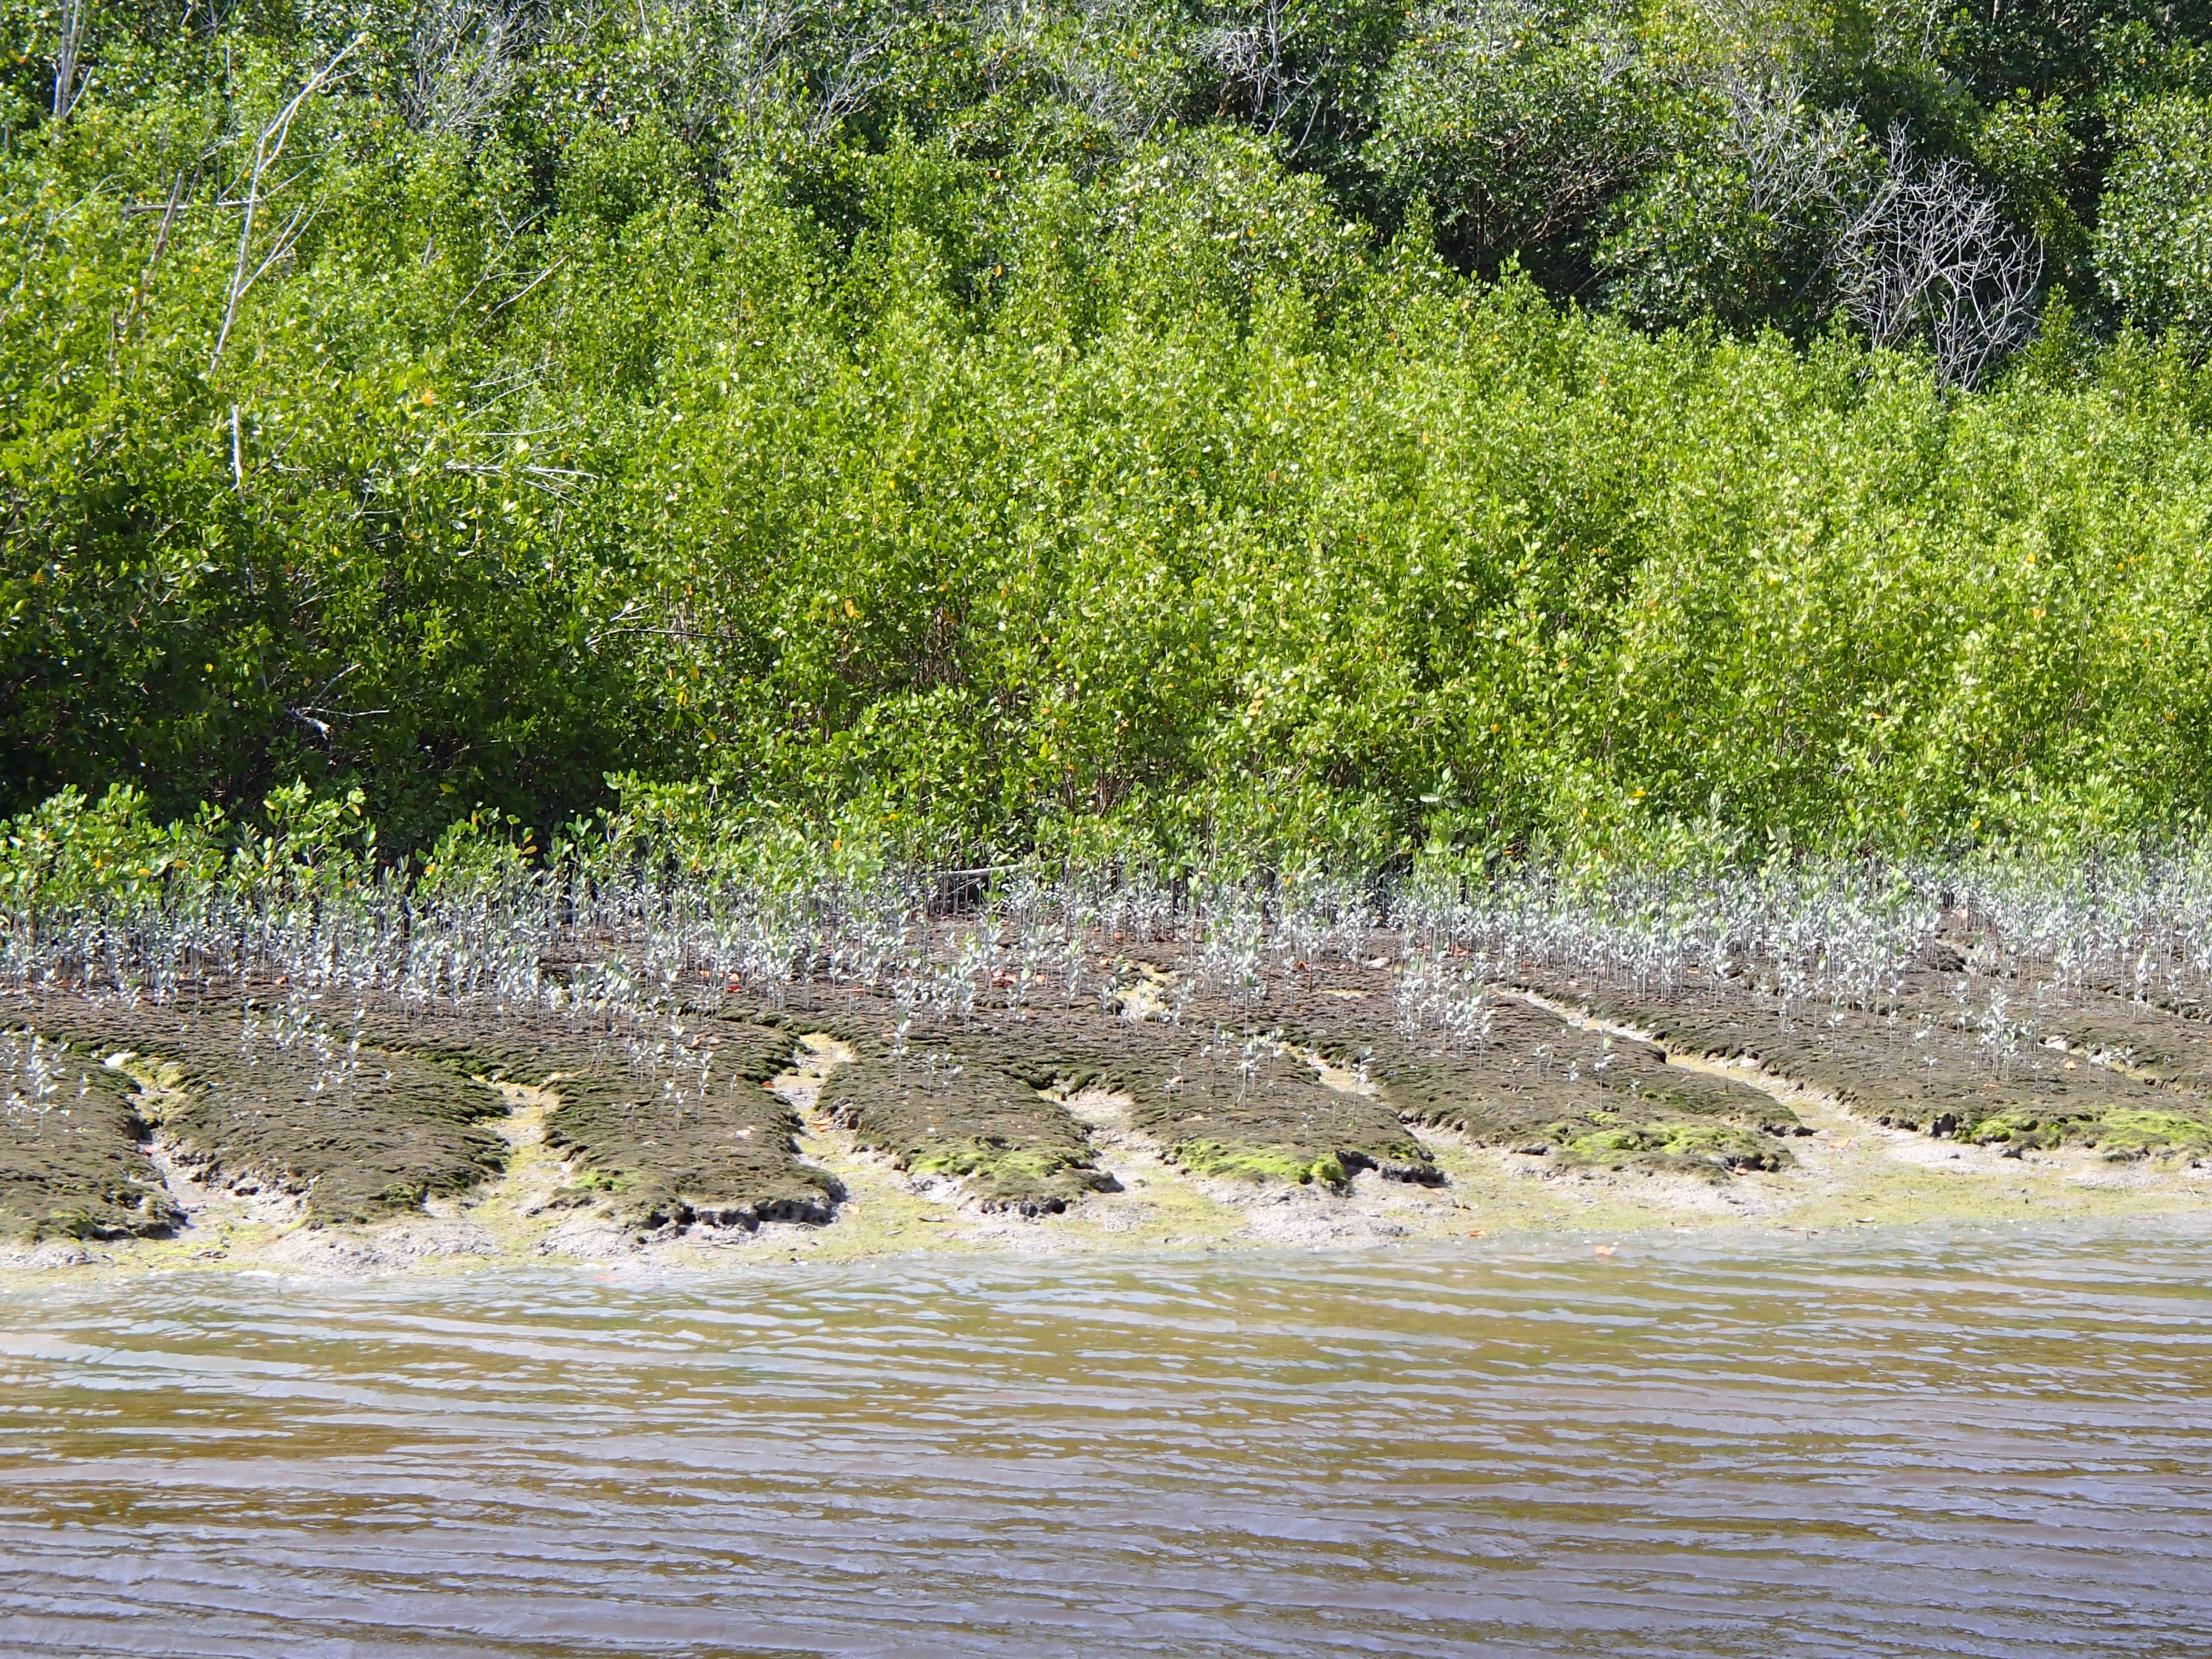 Mangrove growth along the Harney River